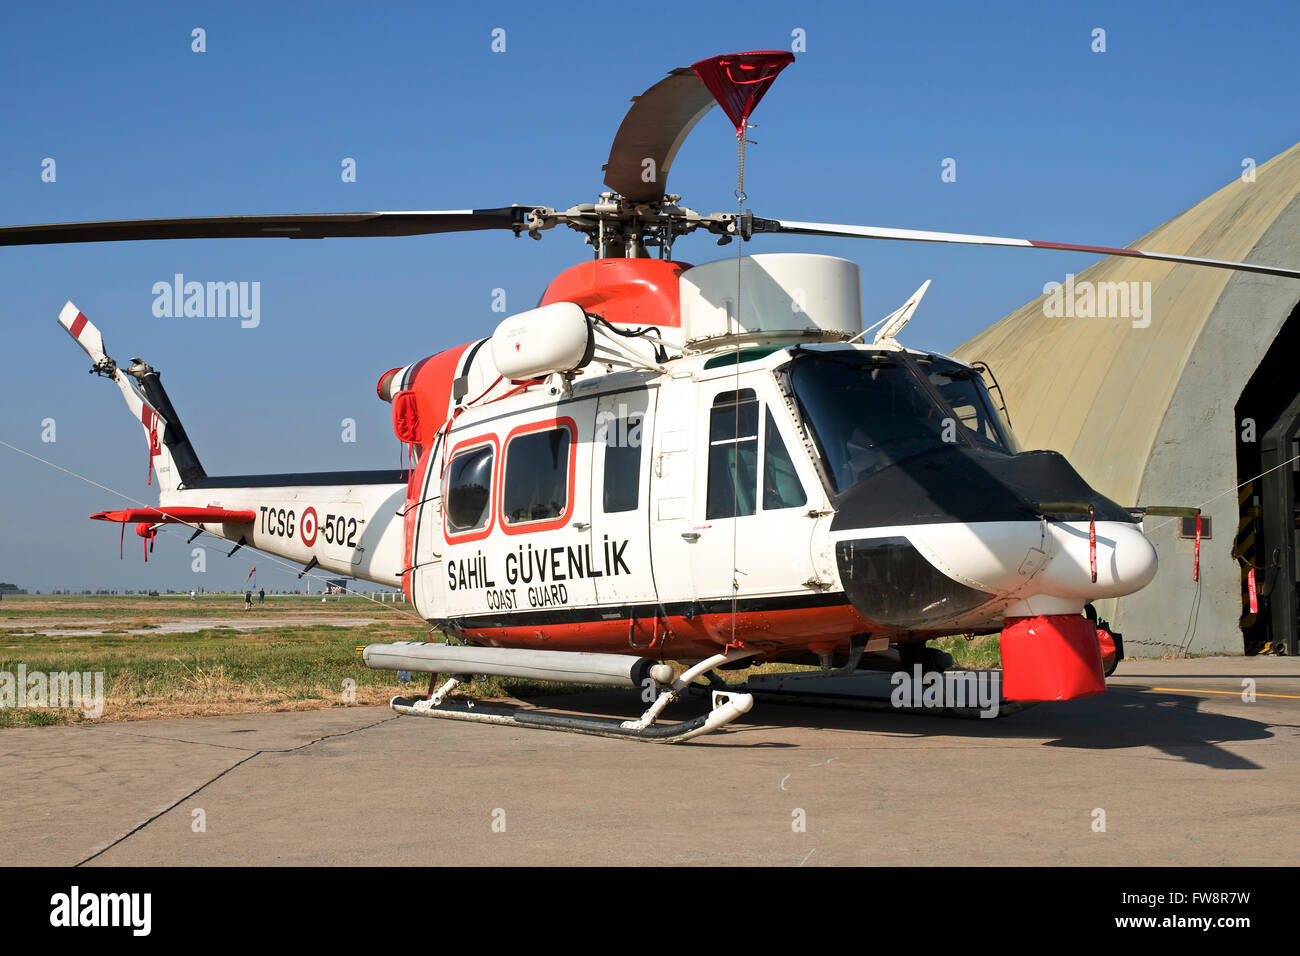 A Turkish Coast Guard Bell 412EP on static display at Izmir, Turkey, during the 100th Anniversary of the Turkish Air Force. Stock Photo